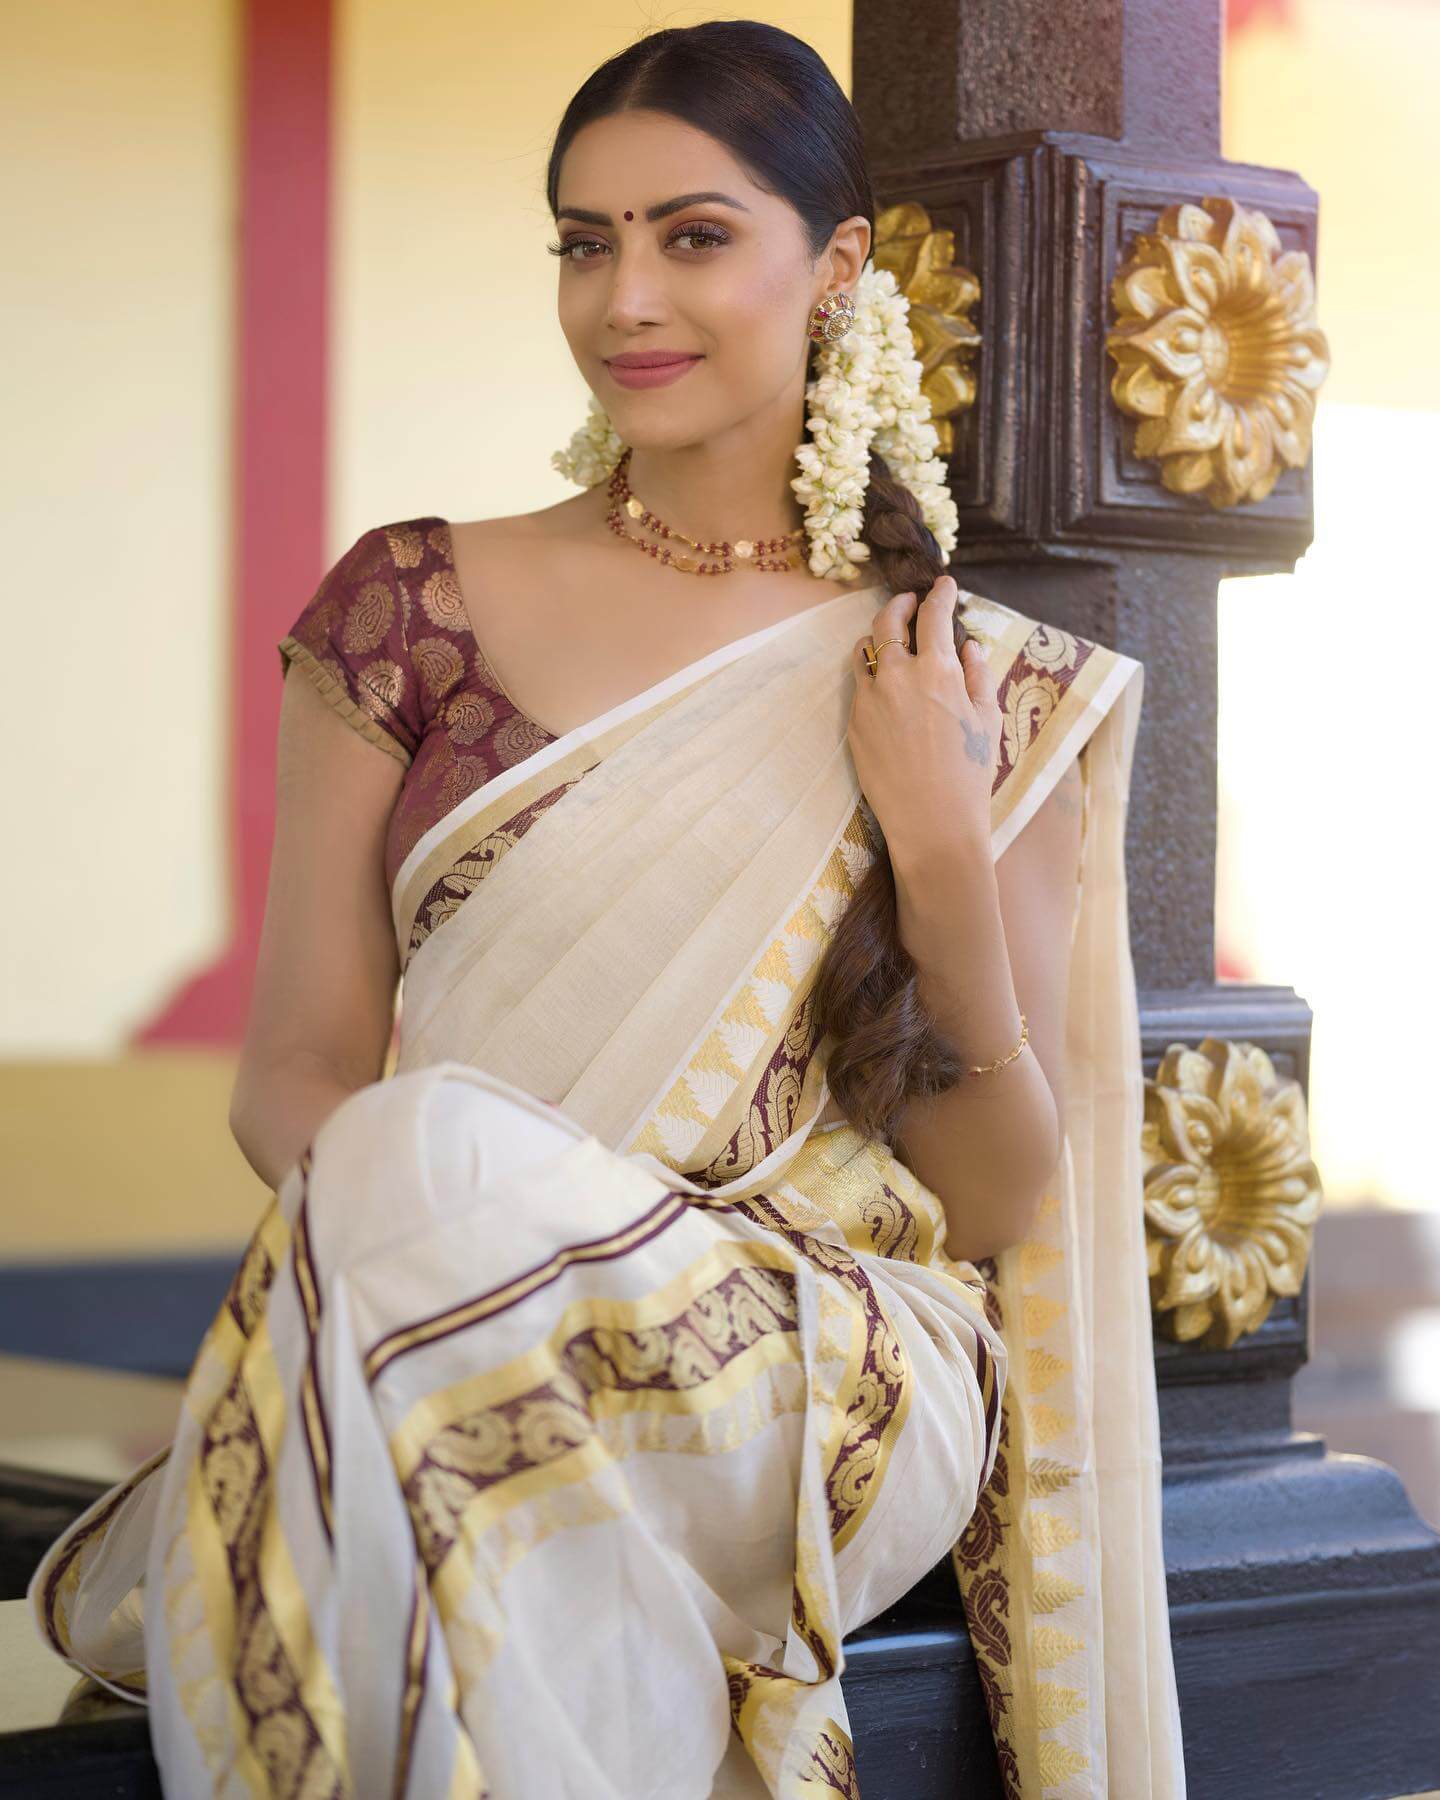 Mamta Mohandas In Ethnic Avtar Wearing White Saree With Mauve Gold Printed Blouse & Braided Hairstyle